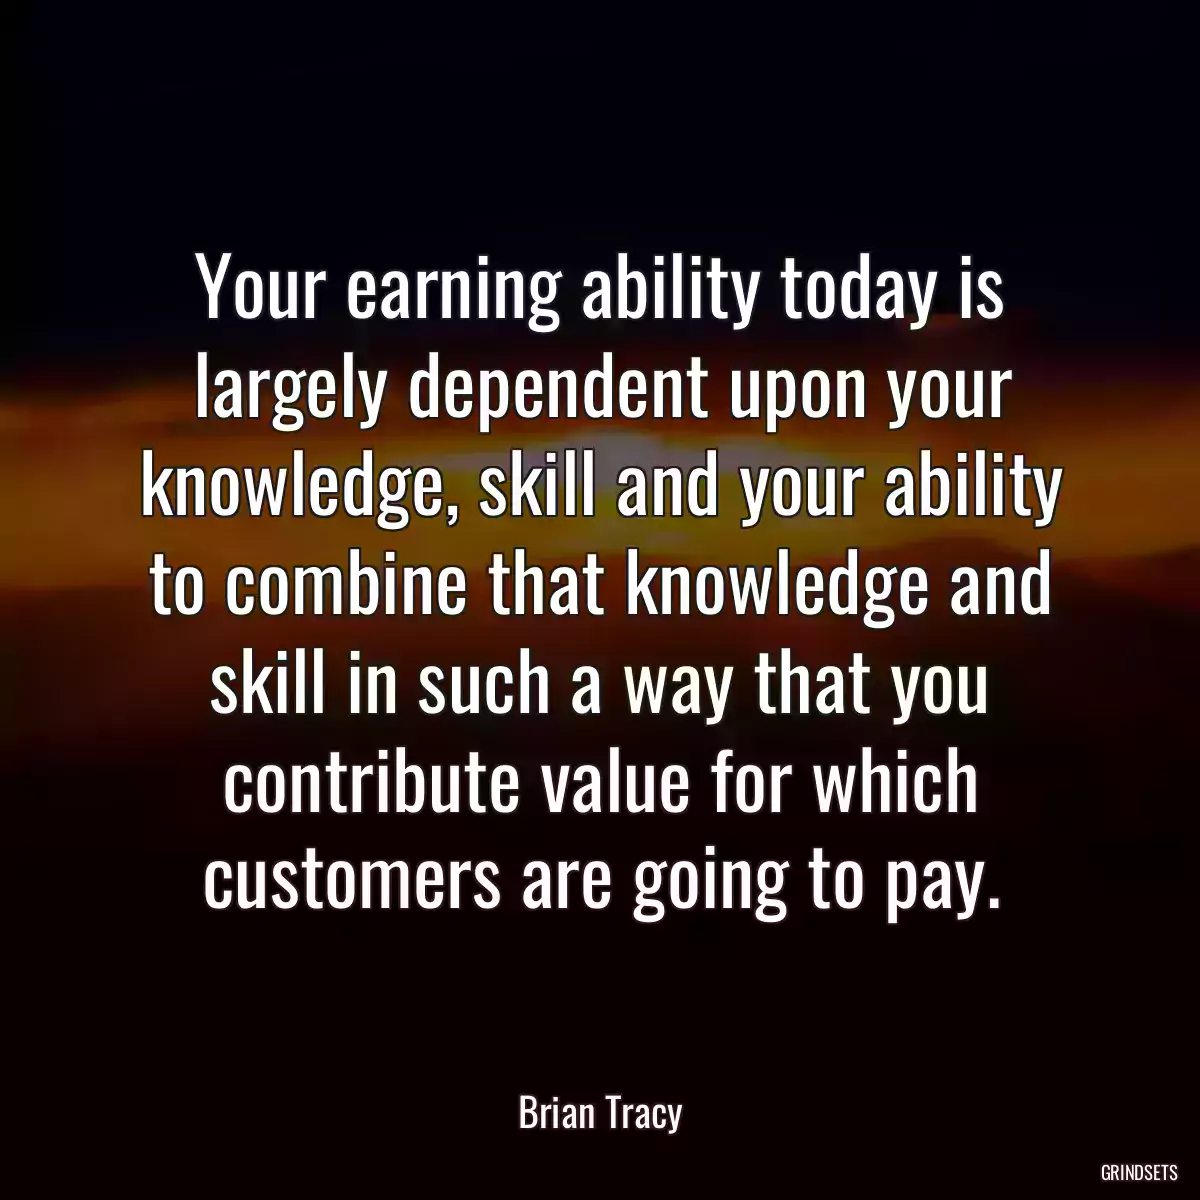 Your earning ability today is largely dependent upon your knowledge, skill and your ability to combine that knowledge and skill in such a way that you contribute value for which customers are going to pay.